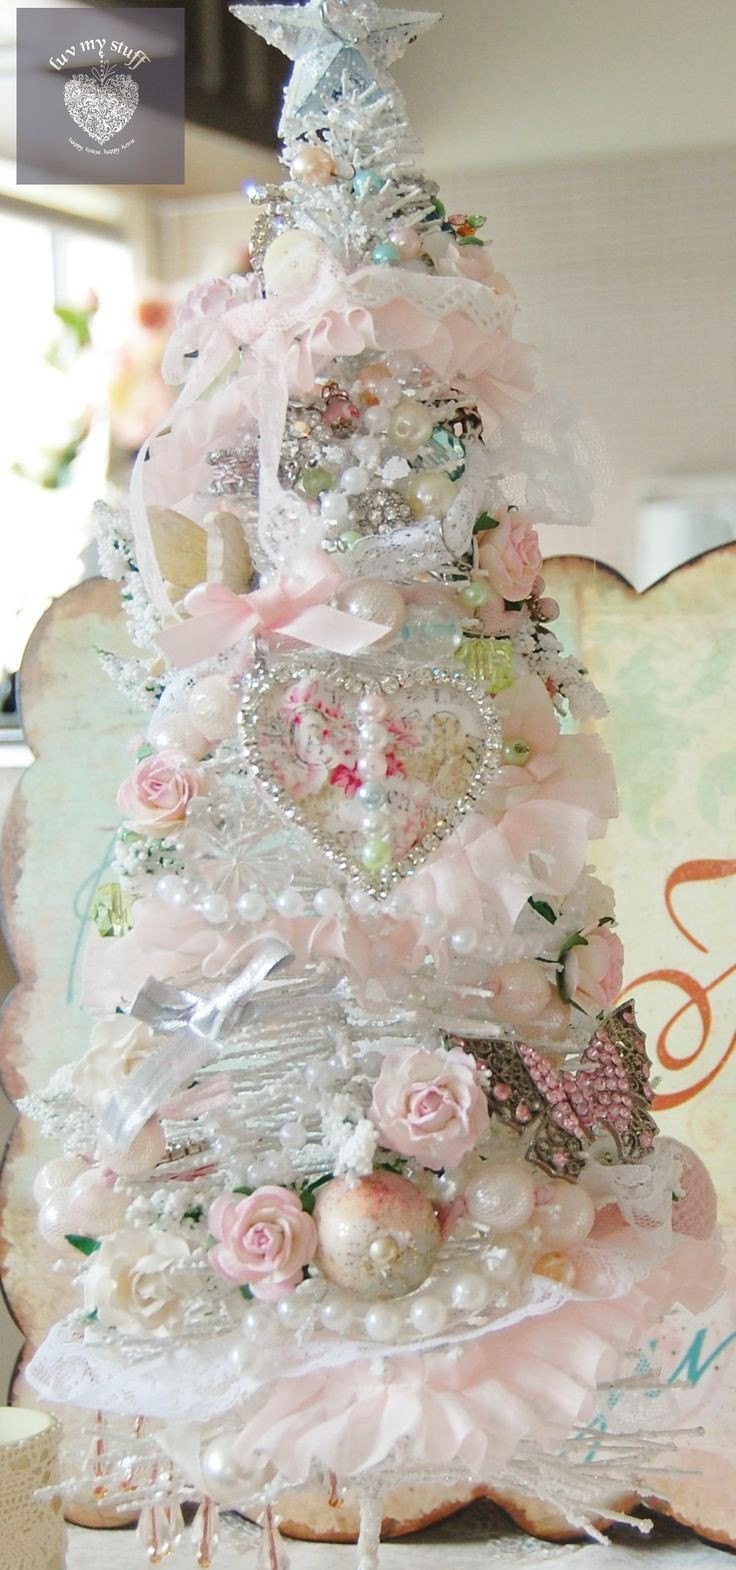 Shabby Chic Christmas Tree
 17 Best images about Shabby Christmas on Pinterest